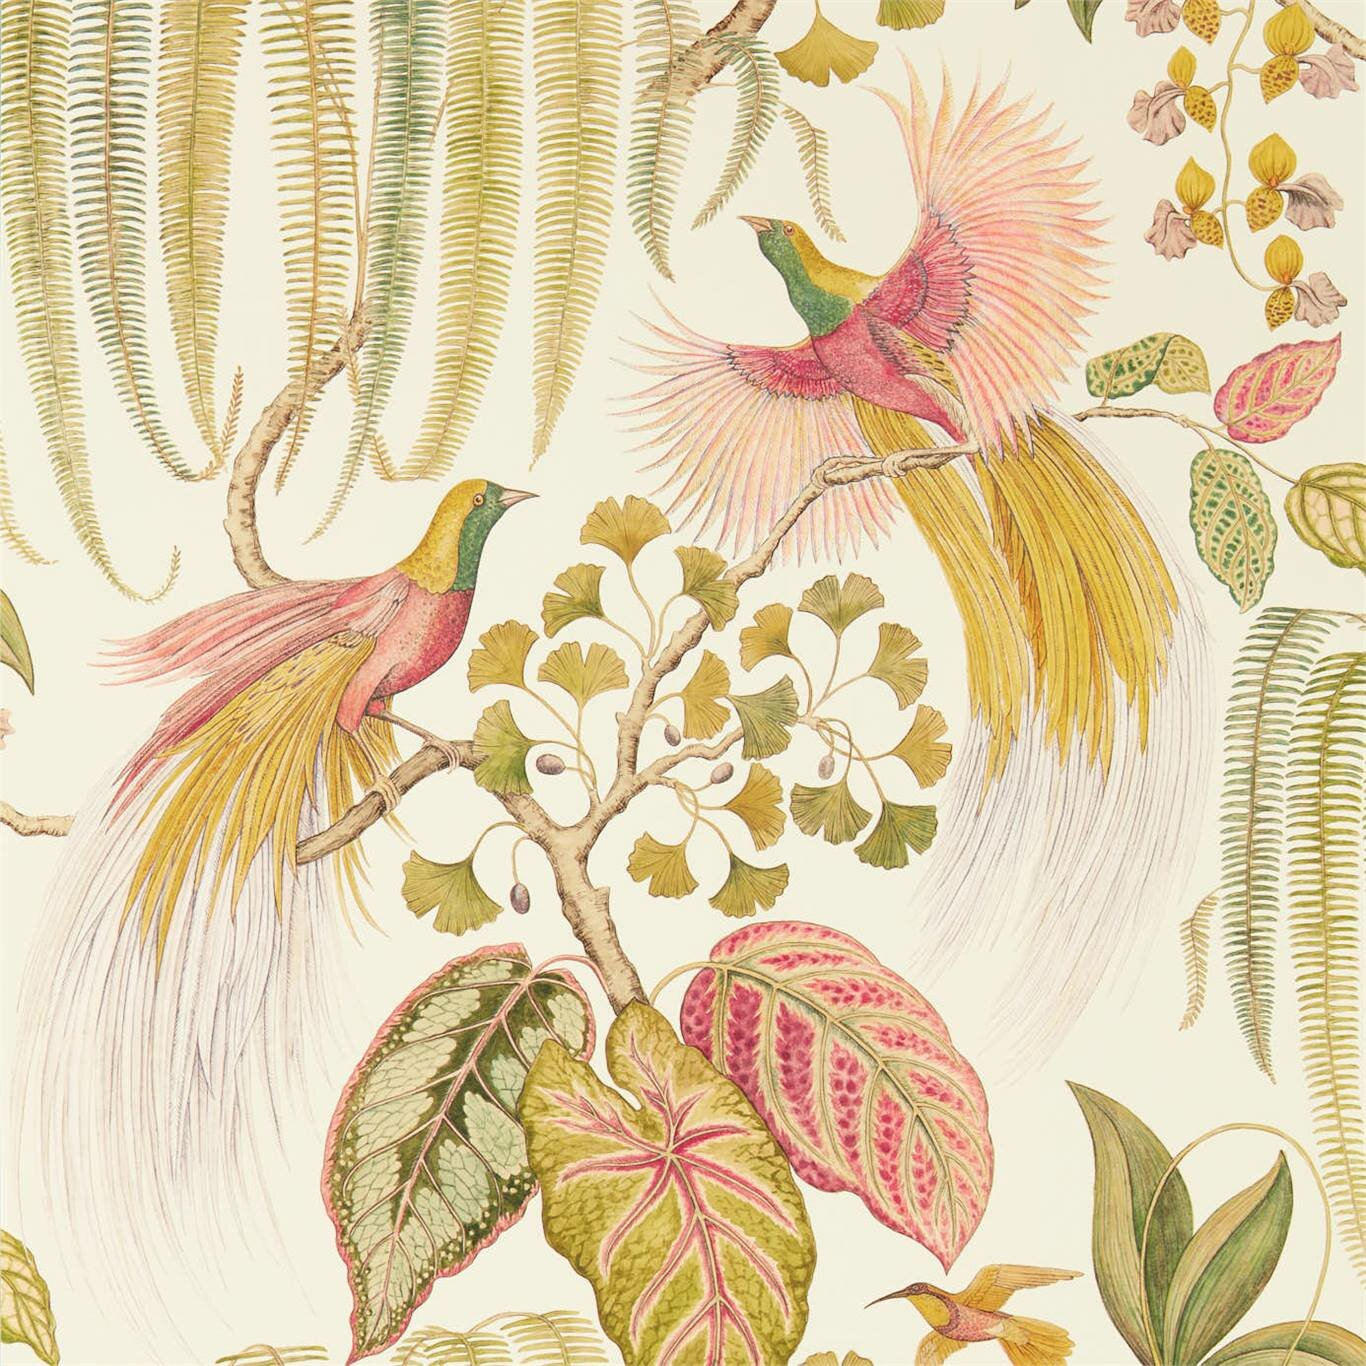 Norwall Floral Bird Sidewall Vinyl Roll Wallpaper Covers 56 sq ft  HM26326  The Home Depot